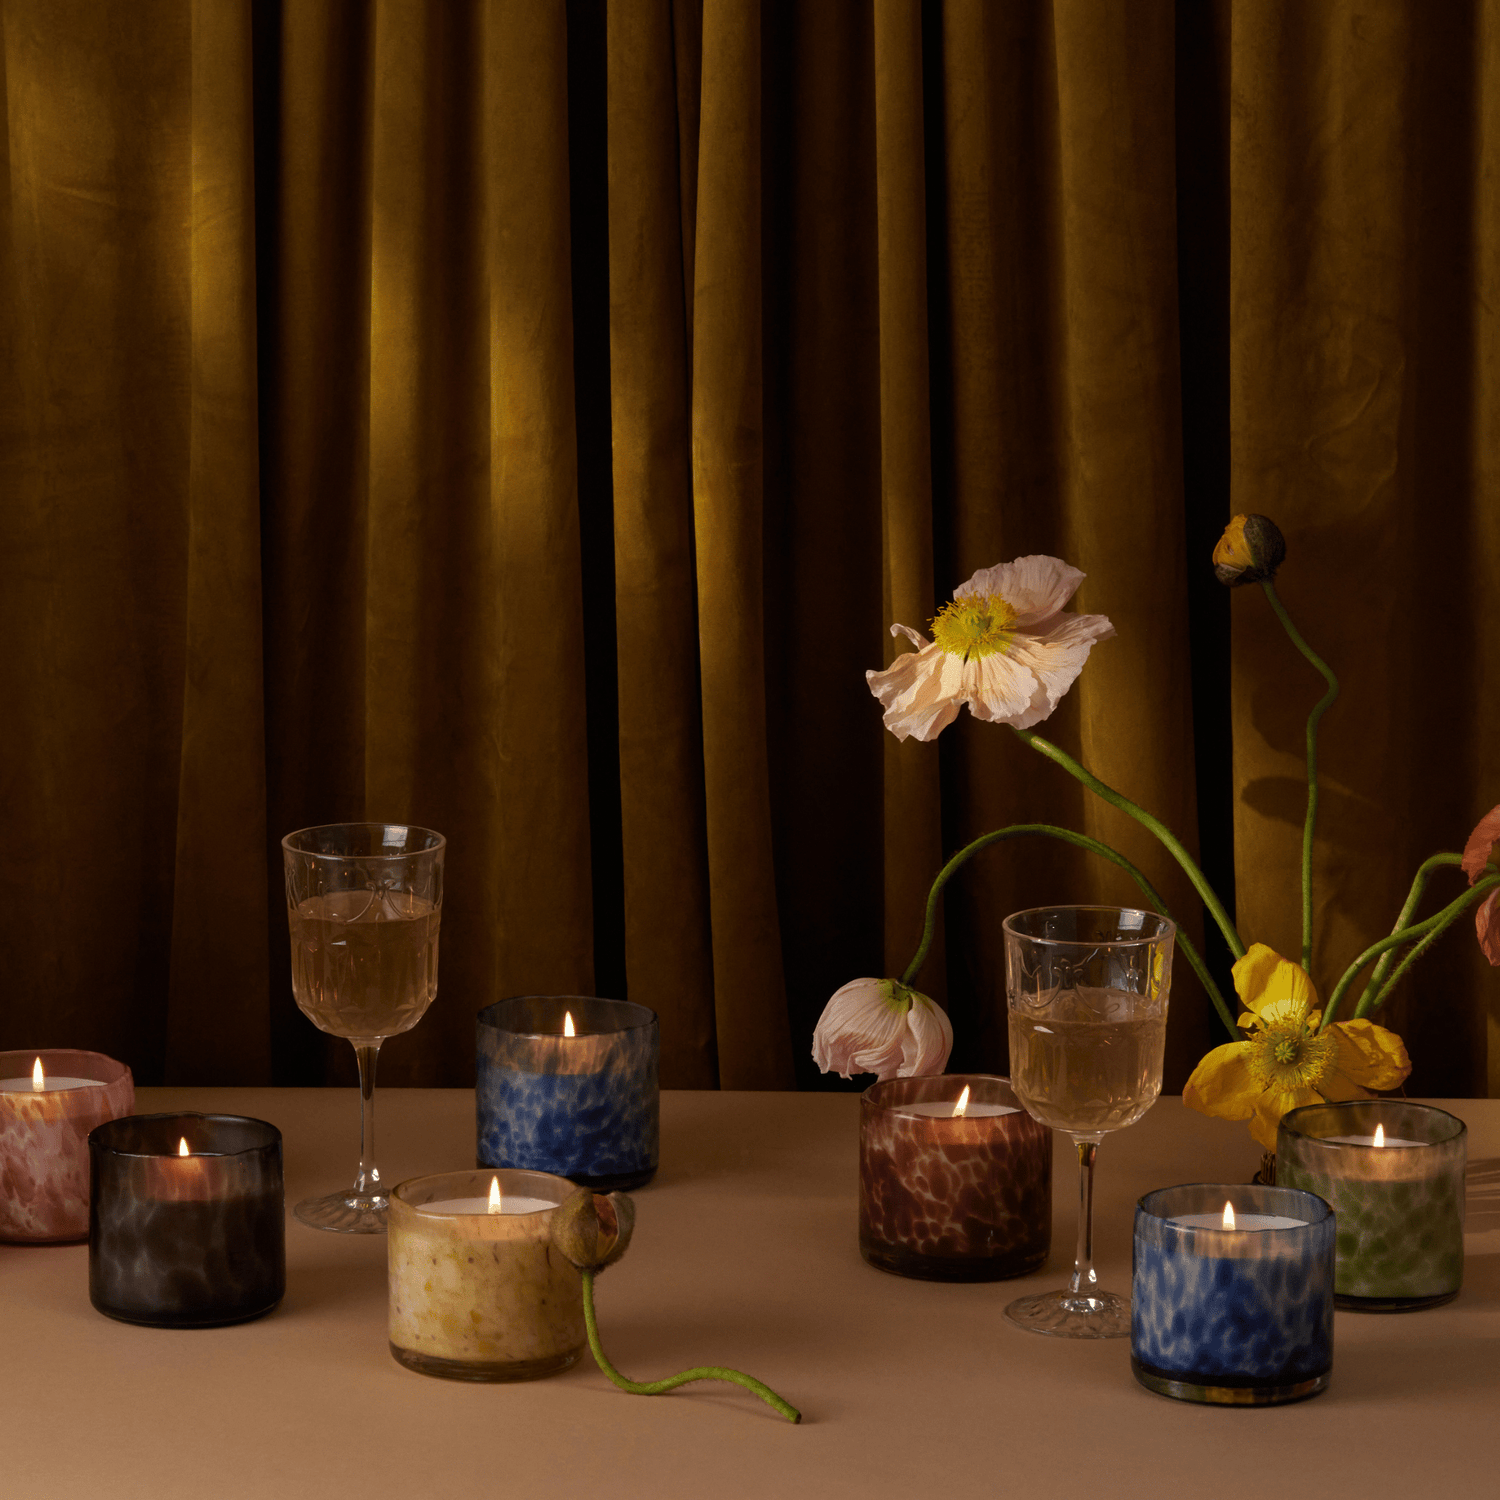 Luxe candles on a table with flowers and wine glasses and a curtain in the background